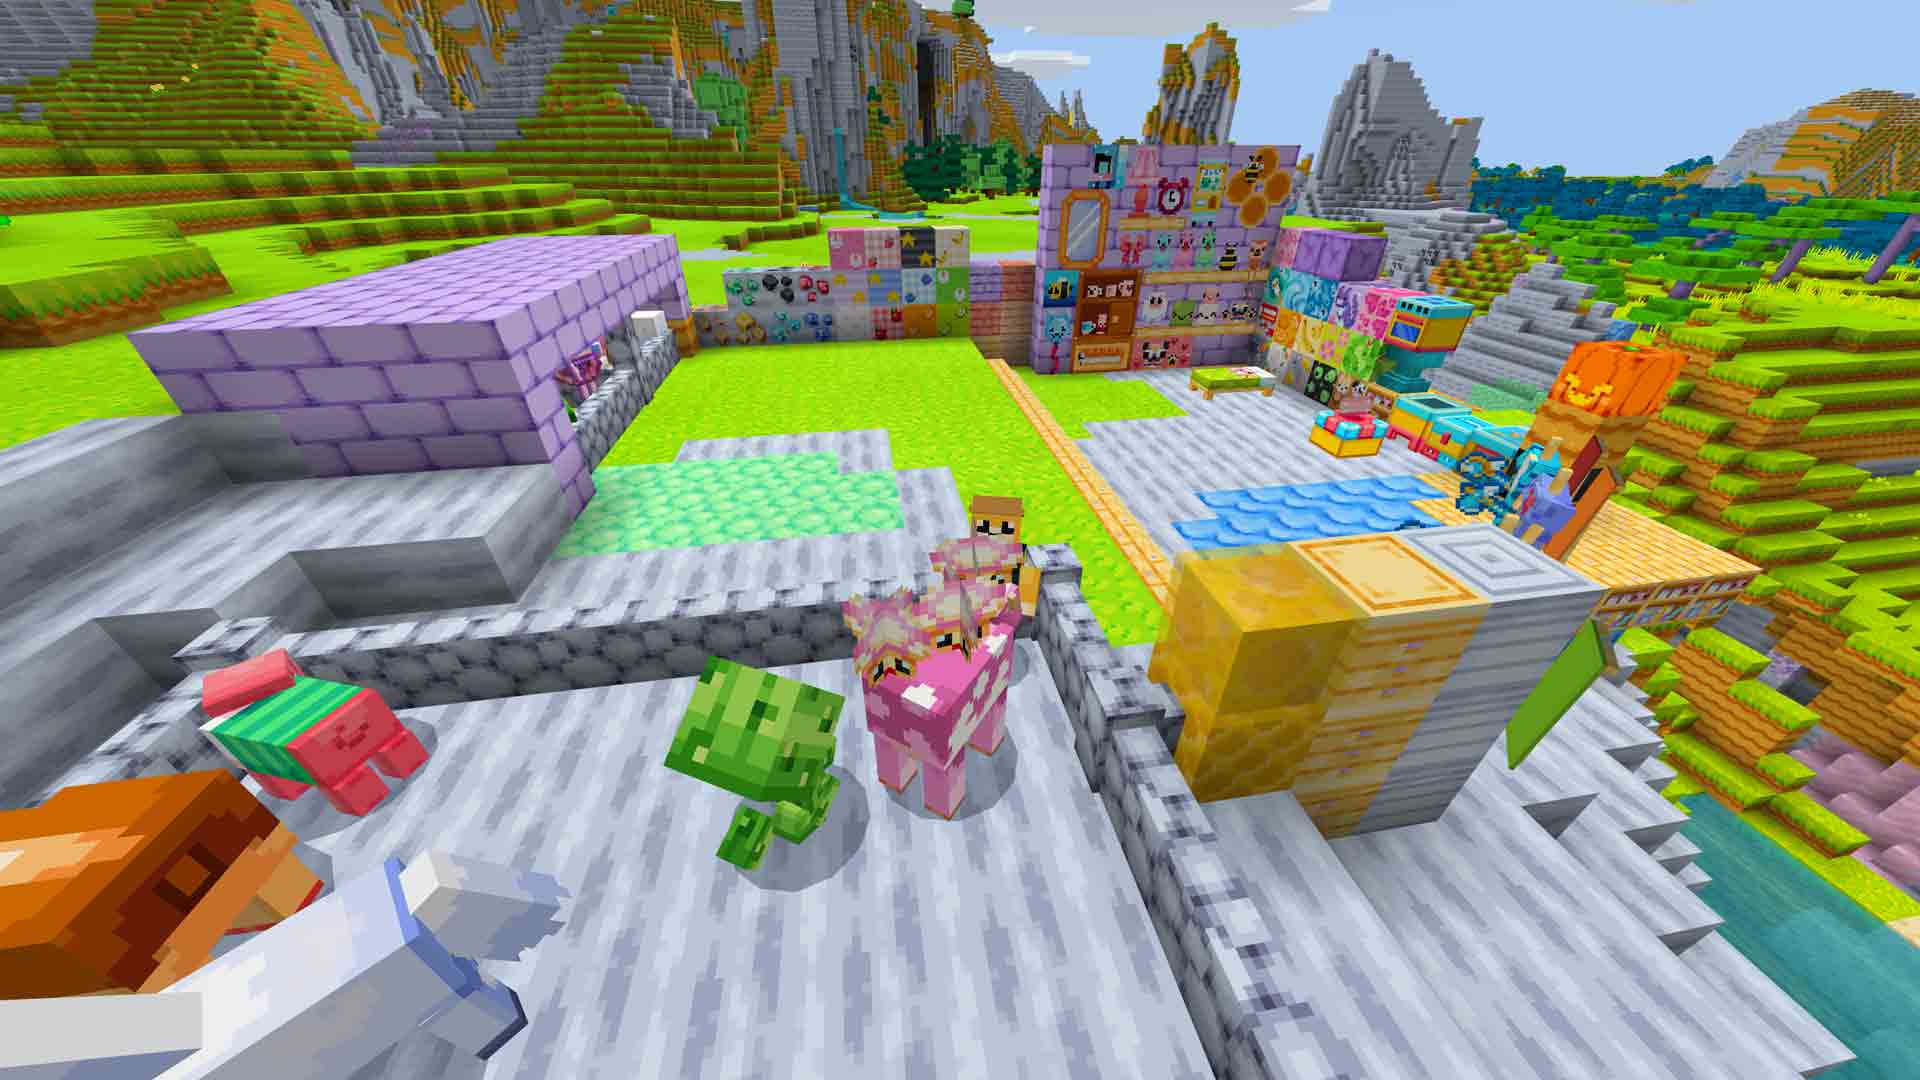 Minecraft Super Cute Texture Pack Review